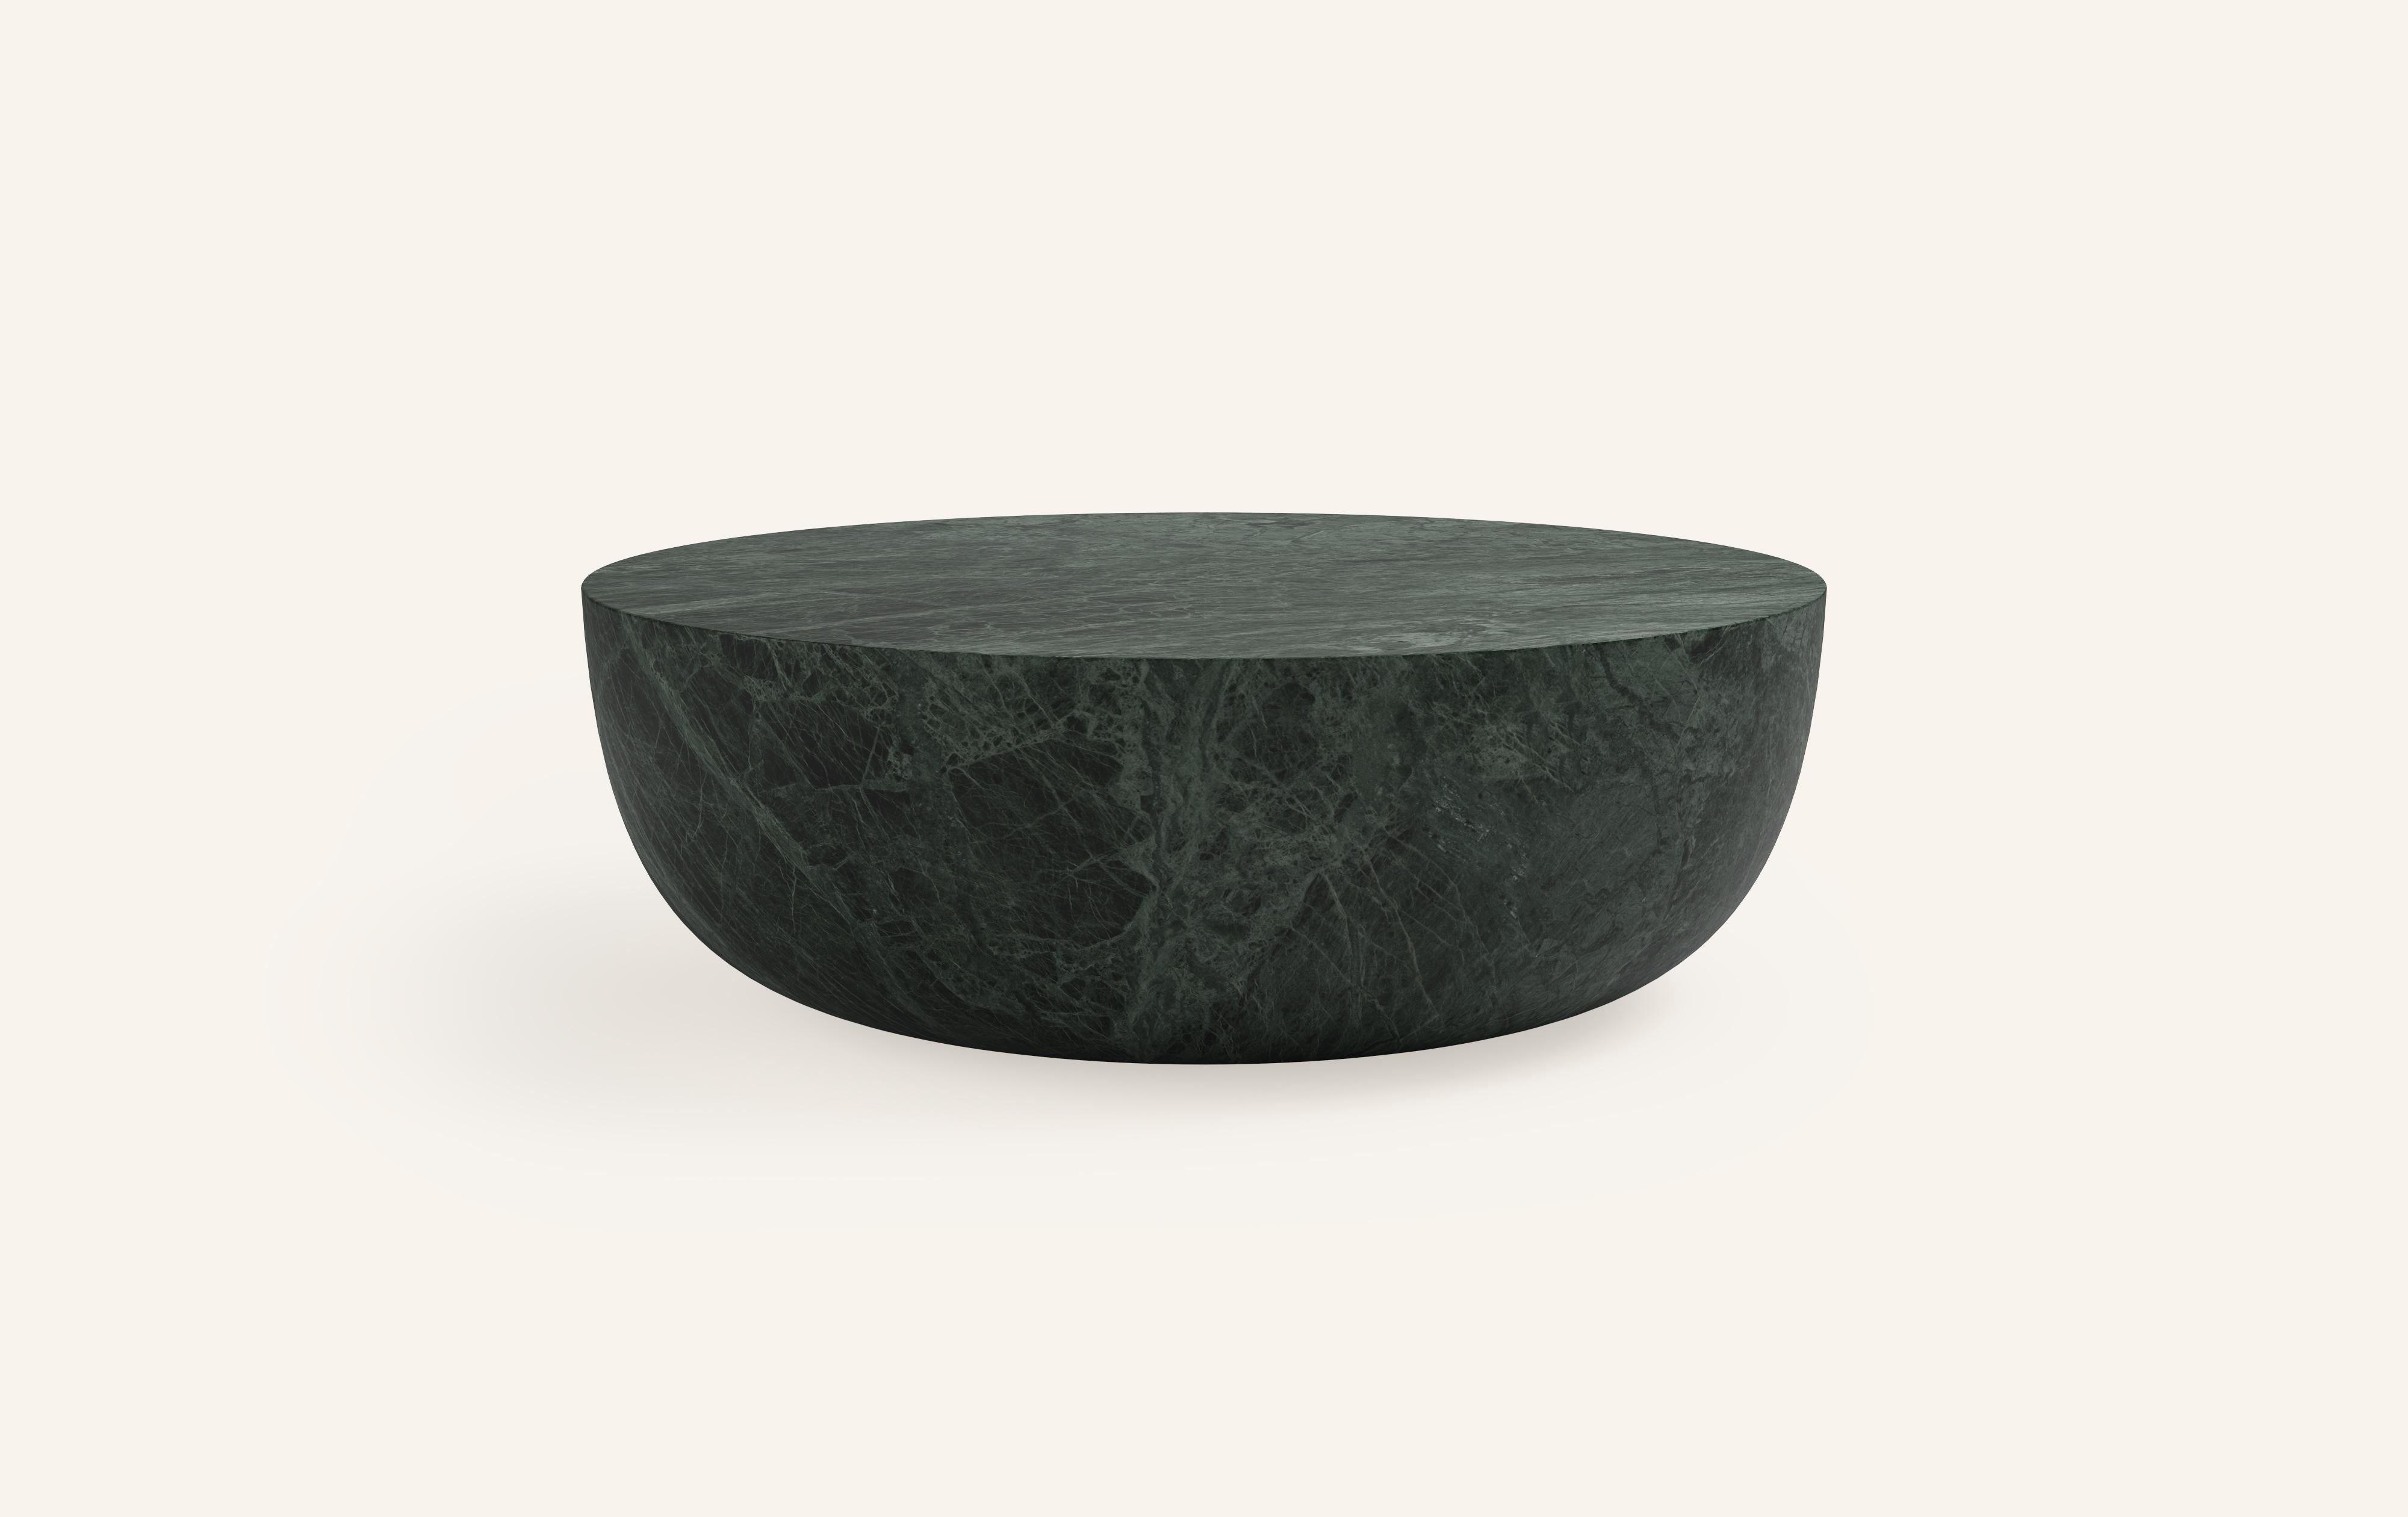 A SLICE OF A ’SPHERE’ OR 'SFERA' IN ITALIAN BALANCES A FLAT SURFACE ATOP AND ROBUST MONOLITH FORM. WITH A BASE SOFTENED BY A CURVED PROFILE, SFERA IS SOFT AND EARTHY IN ITS AVAILABLE STONE SELECTIONS.

DIMENSIONS: 
60”L x 60”W x 16”H: 
- SOLID